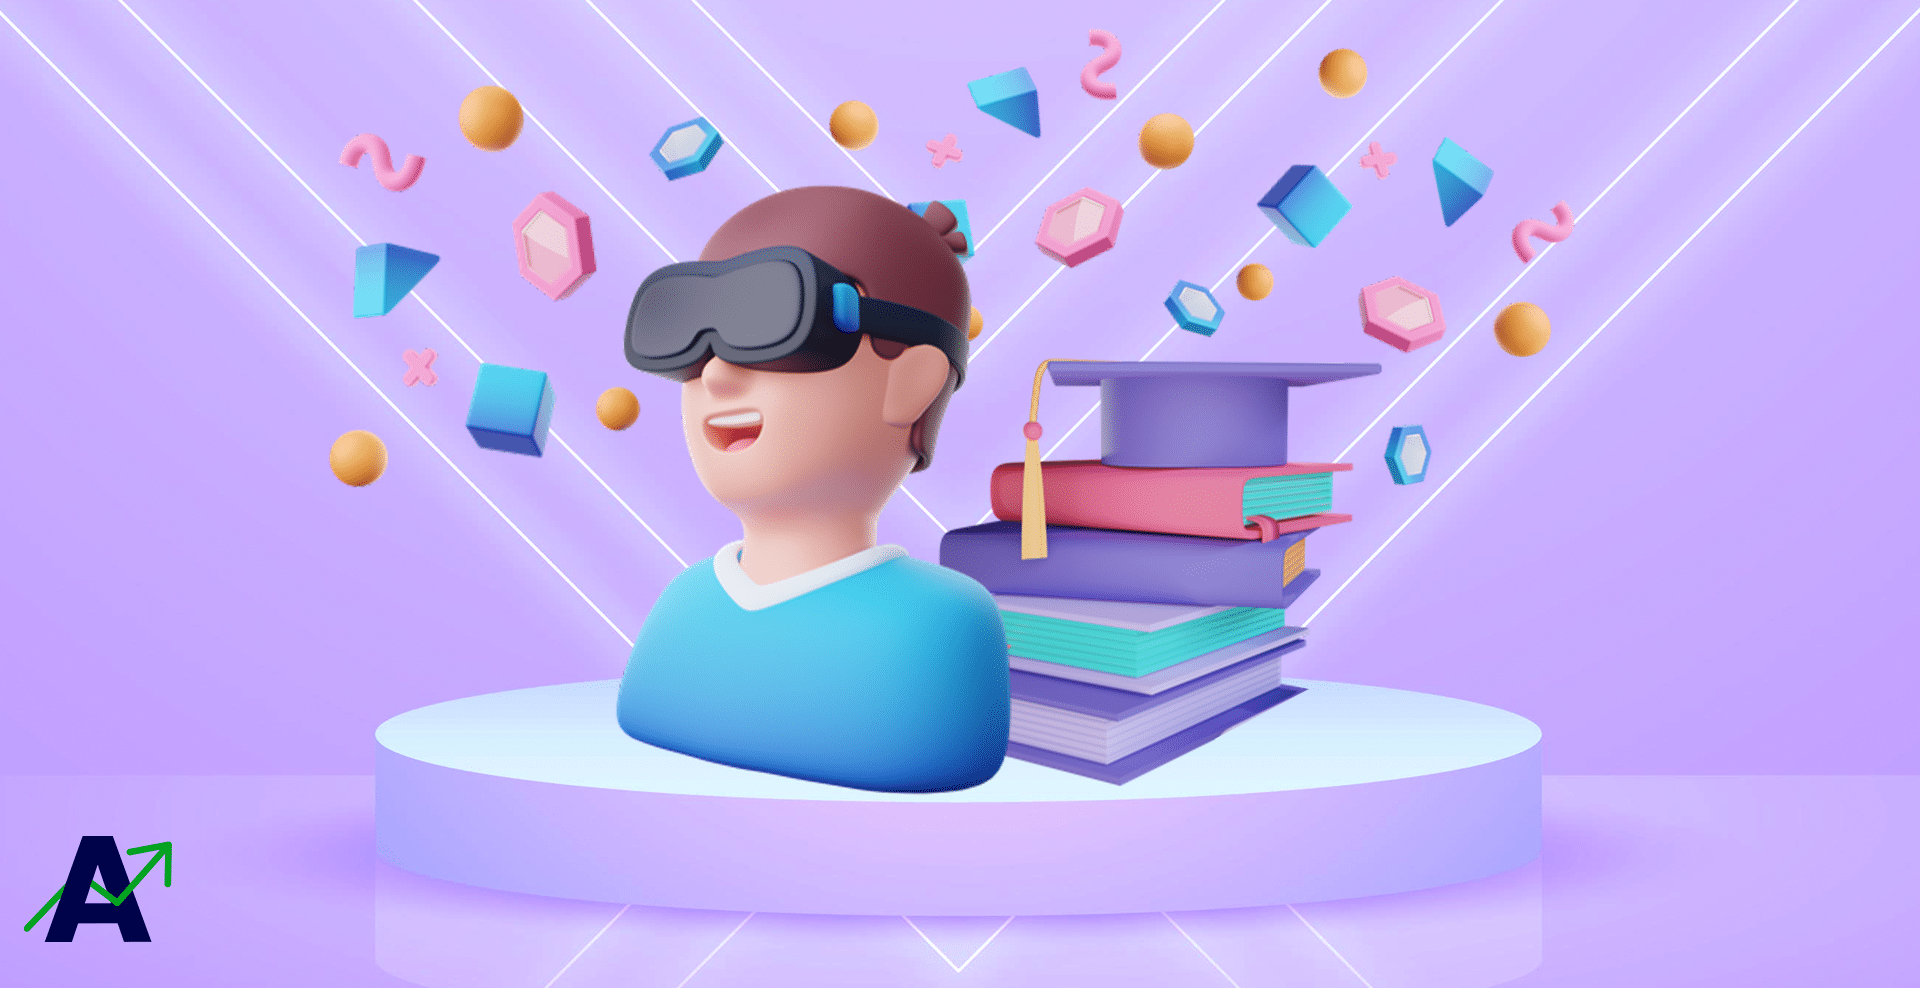 How the Metaverse Will Change Education